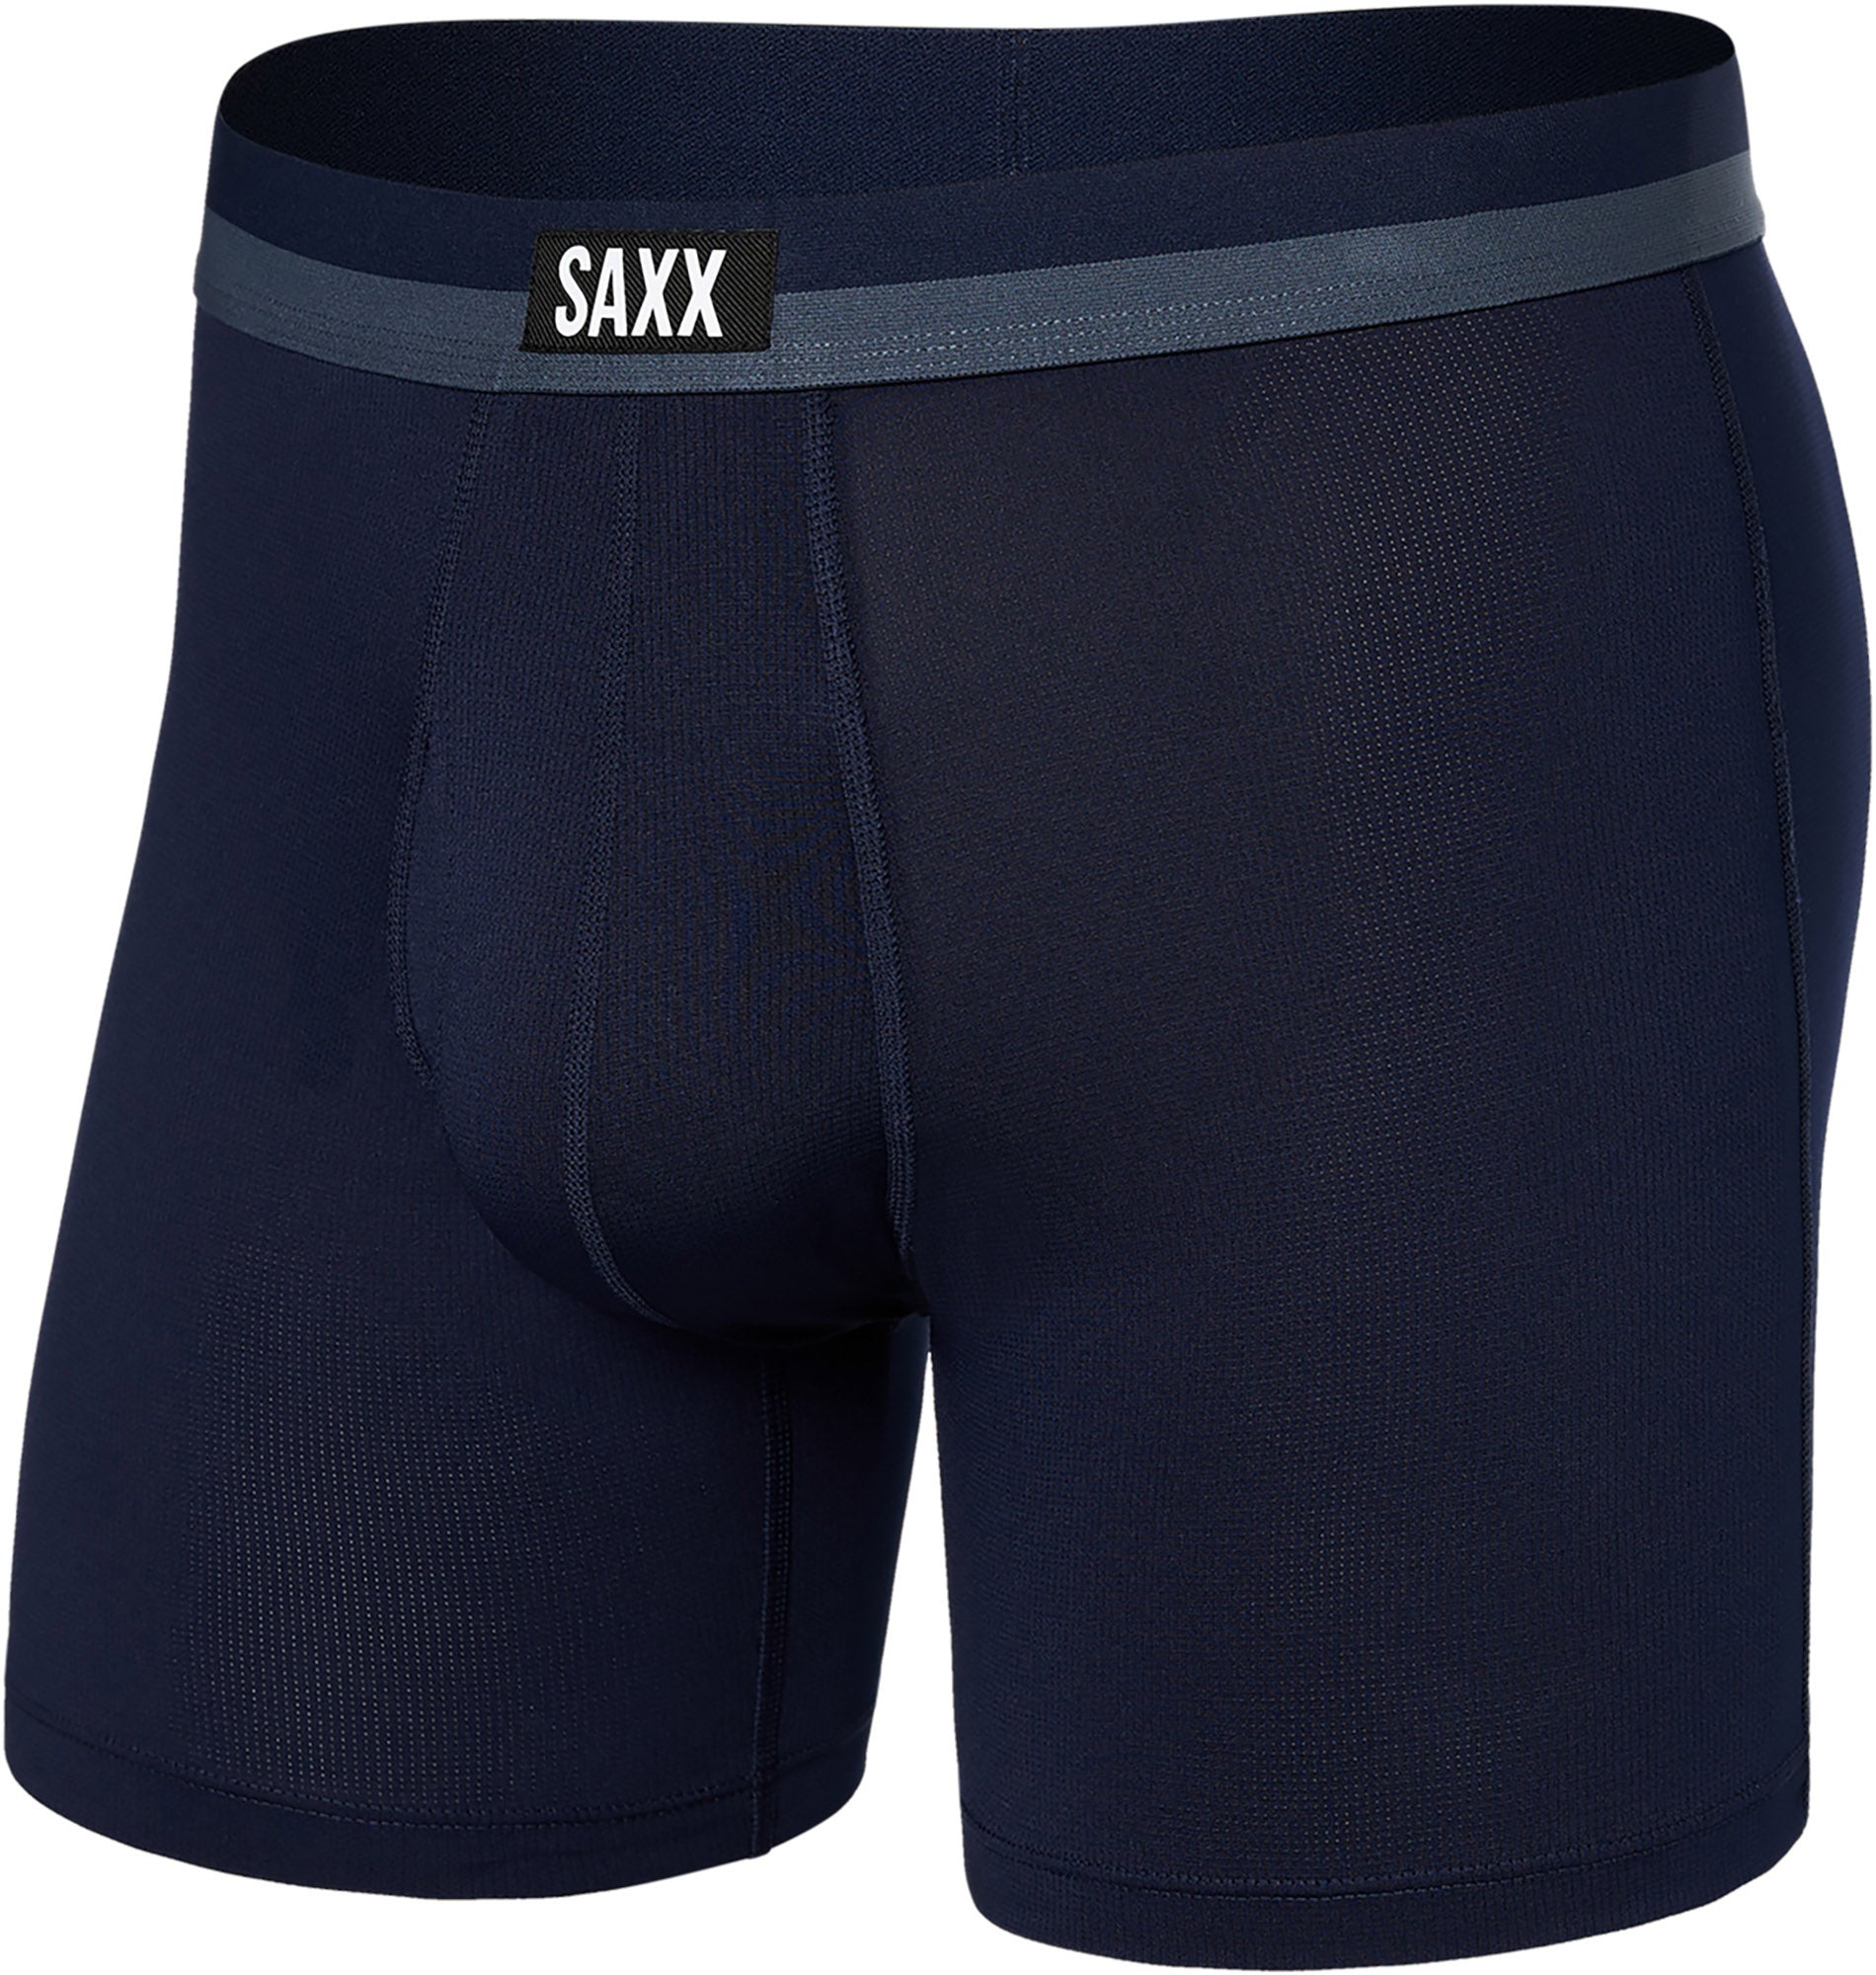 Men's sports boxer briefs with a fly SAXX SPORT MESH Boxer Brief Fly - navy  blue., BRANDS \ SAXX \ SPORTS BOXER SHORTS